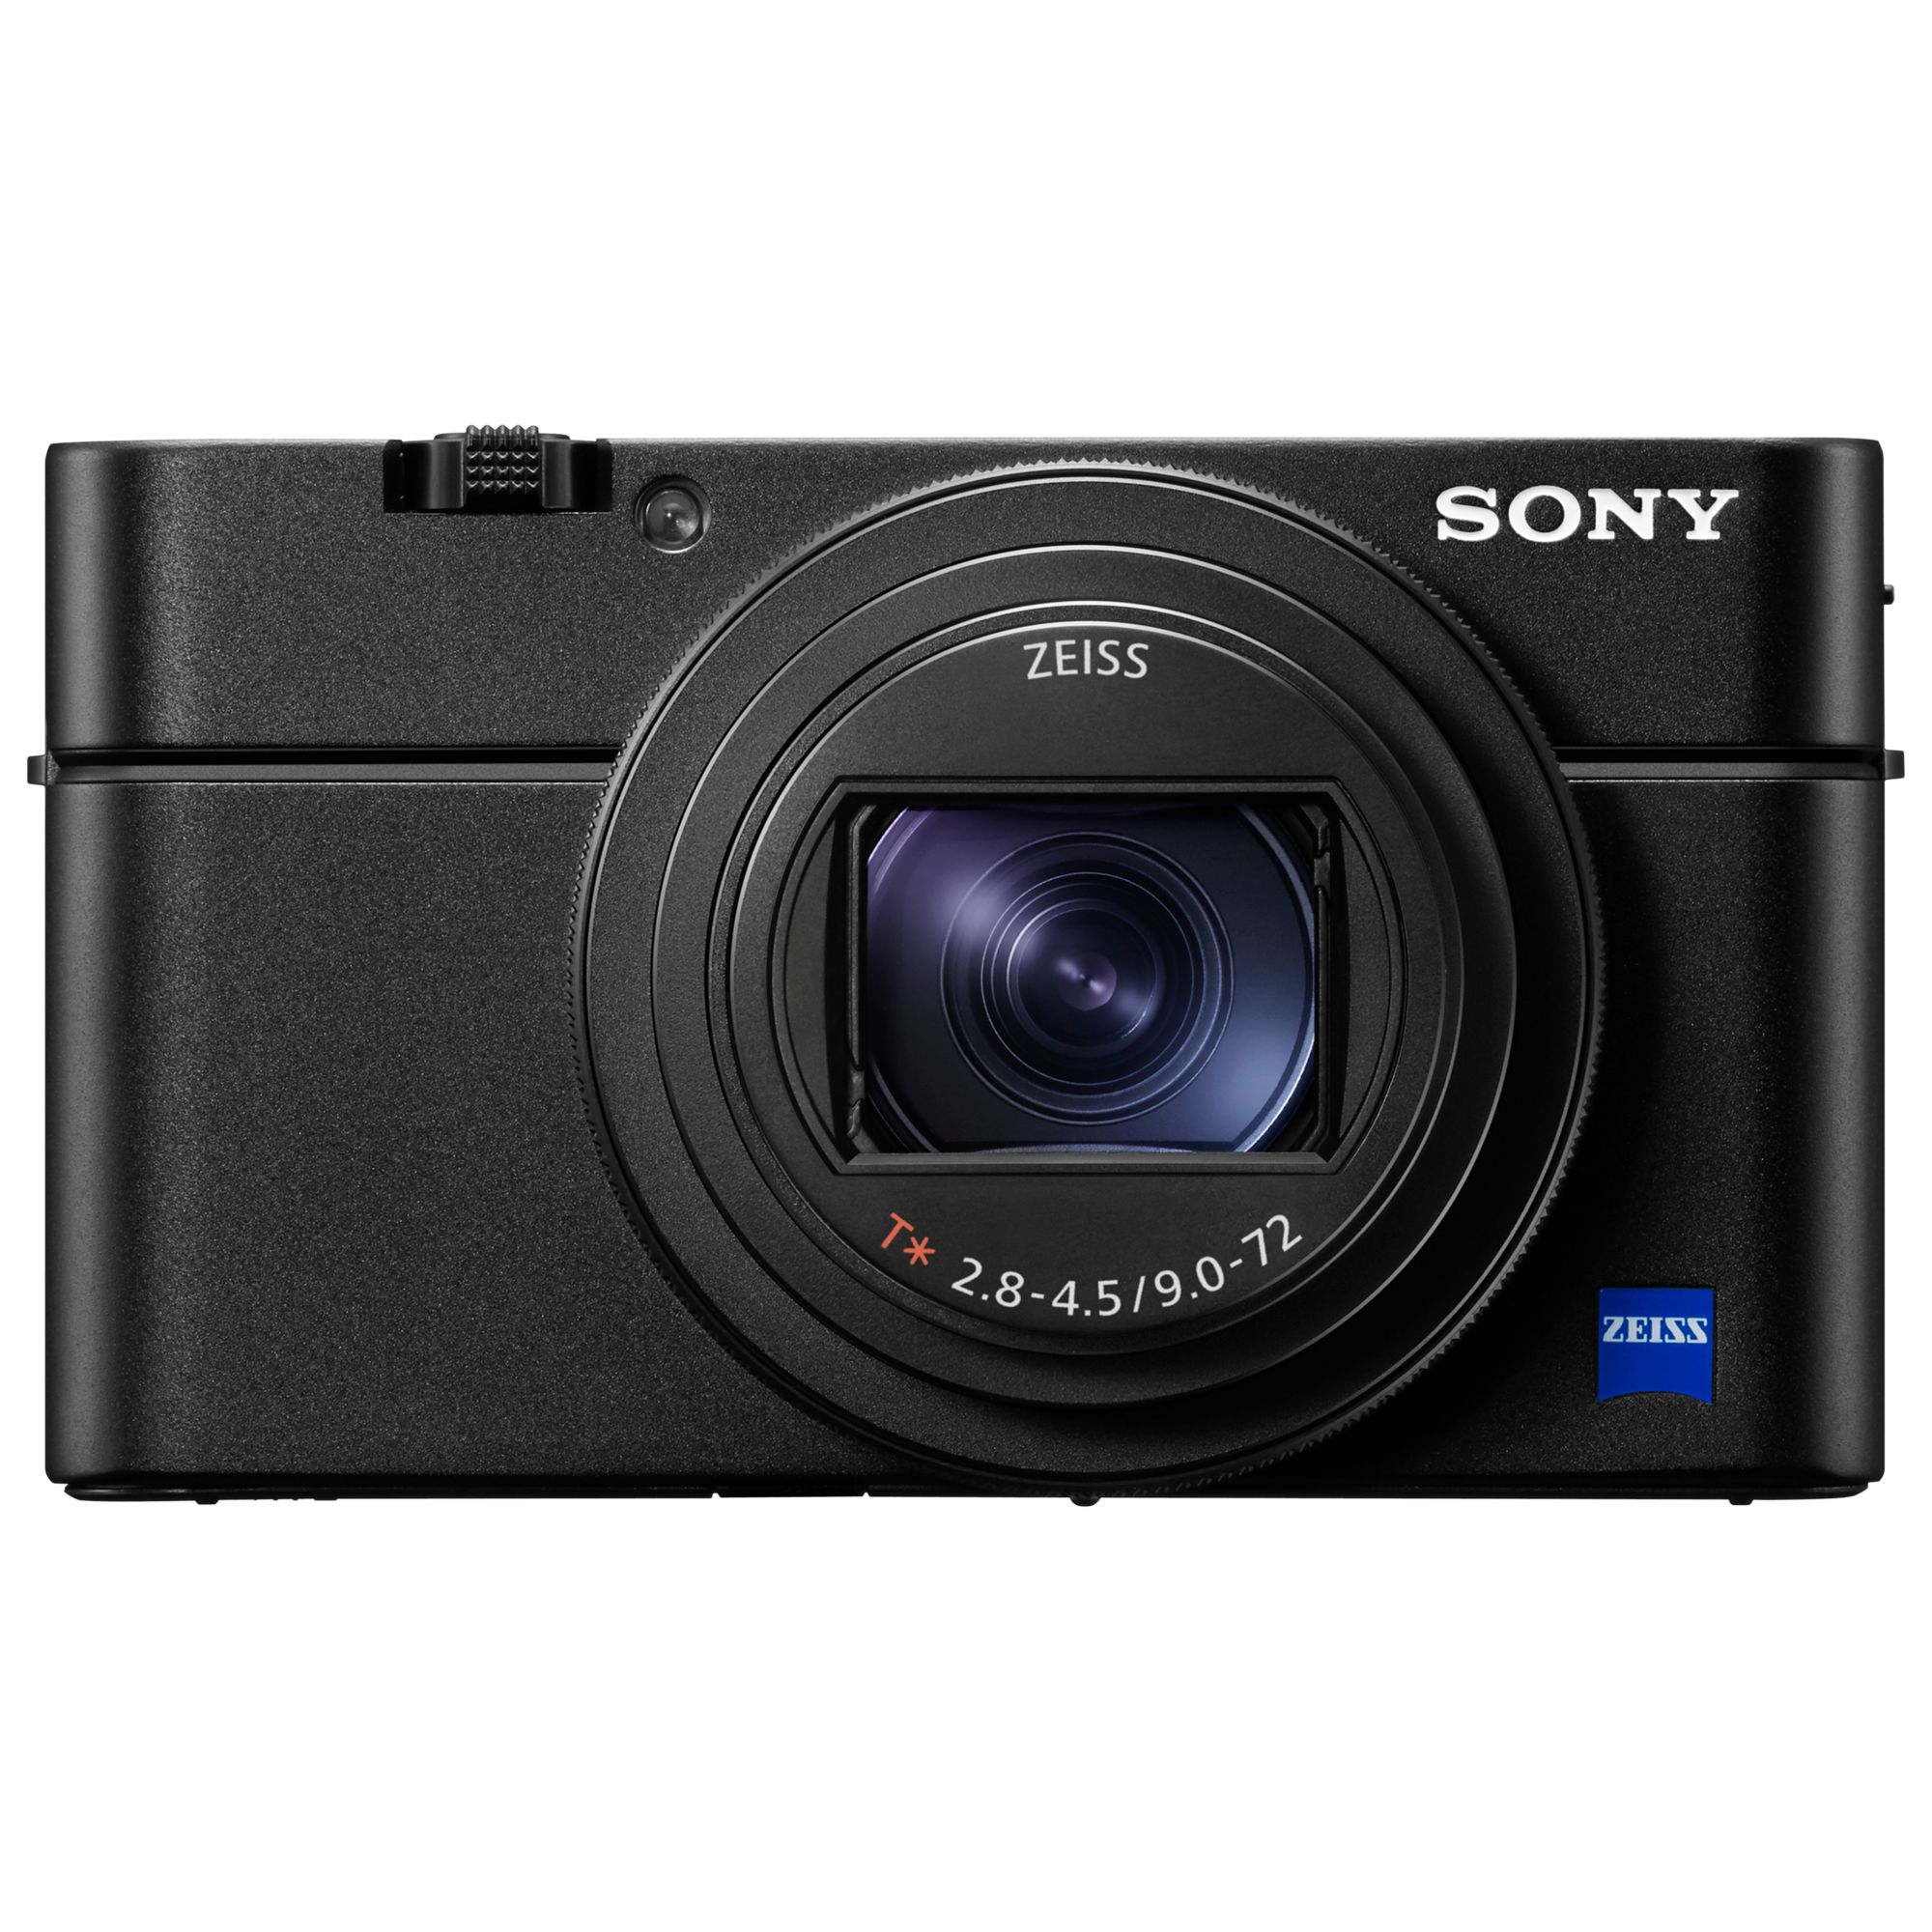 Sony Cyber-shot DSC-RX100 VI Camera, 4K, 20.1MP, 8x Optical Zoom, Wi-Fi, Bluetooth, NFC, OLED EVF, 3 Tiltable Touch Screen